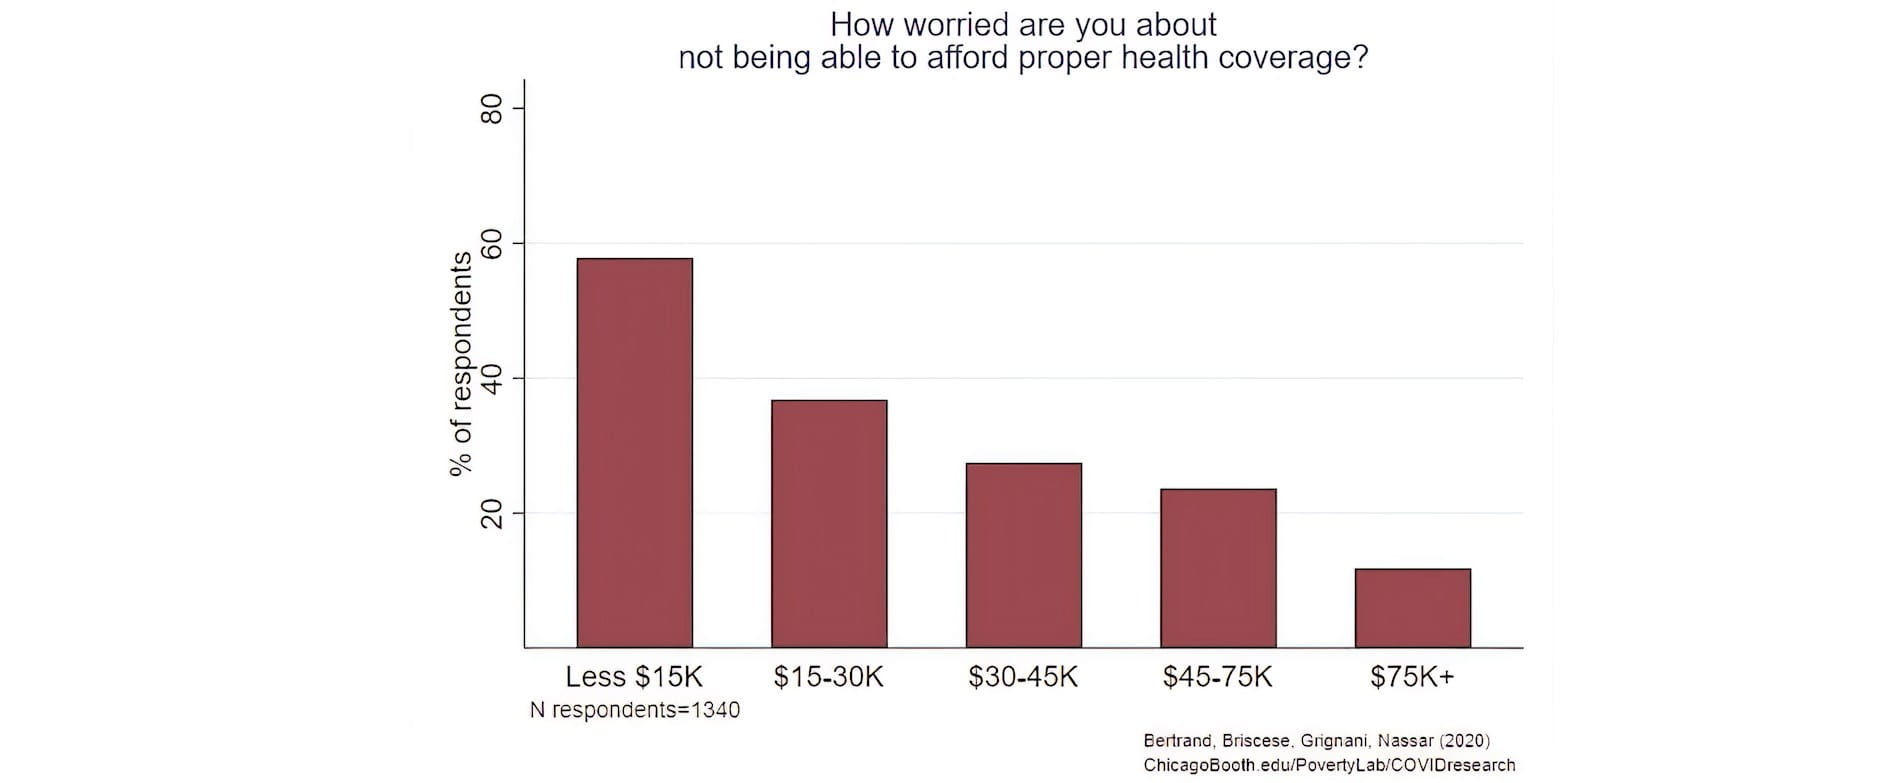 Finding 3b Vertical Bar Graph How worried are you about not being able to afford proper health coverage